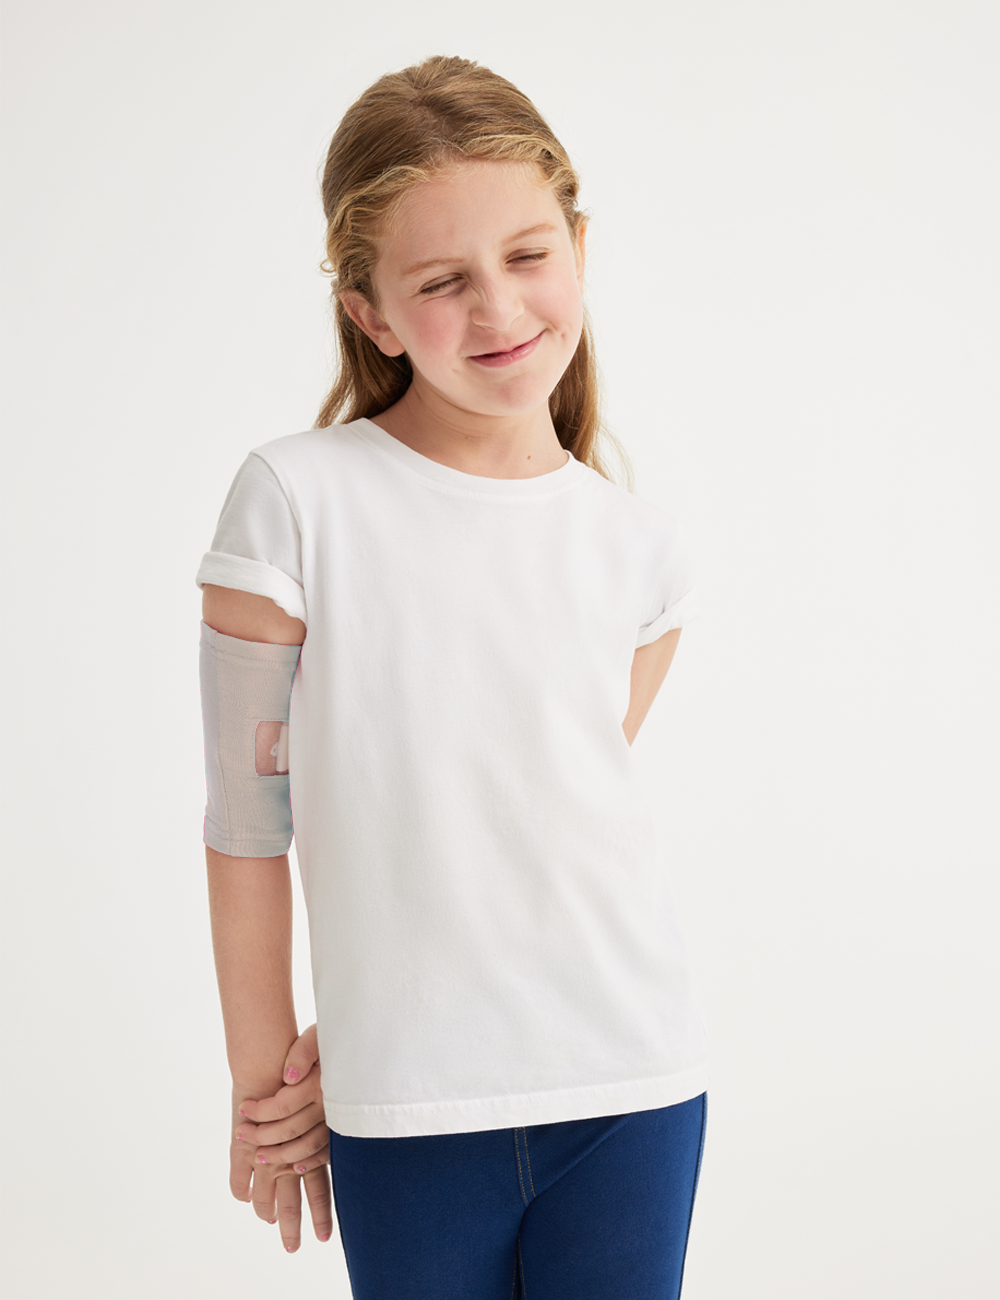 Kid&#39;s Ultra Grip PICC Line Cover